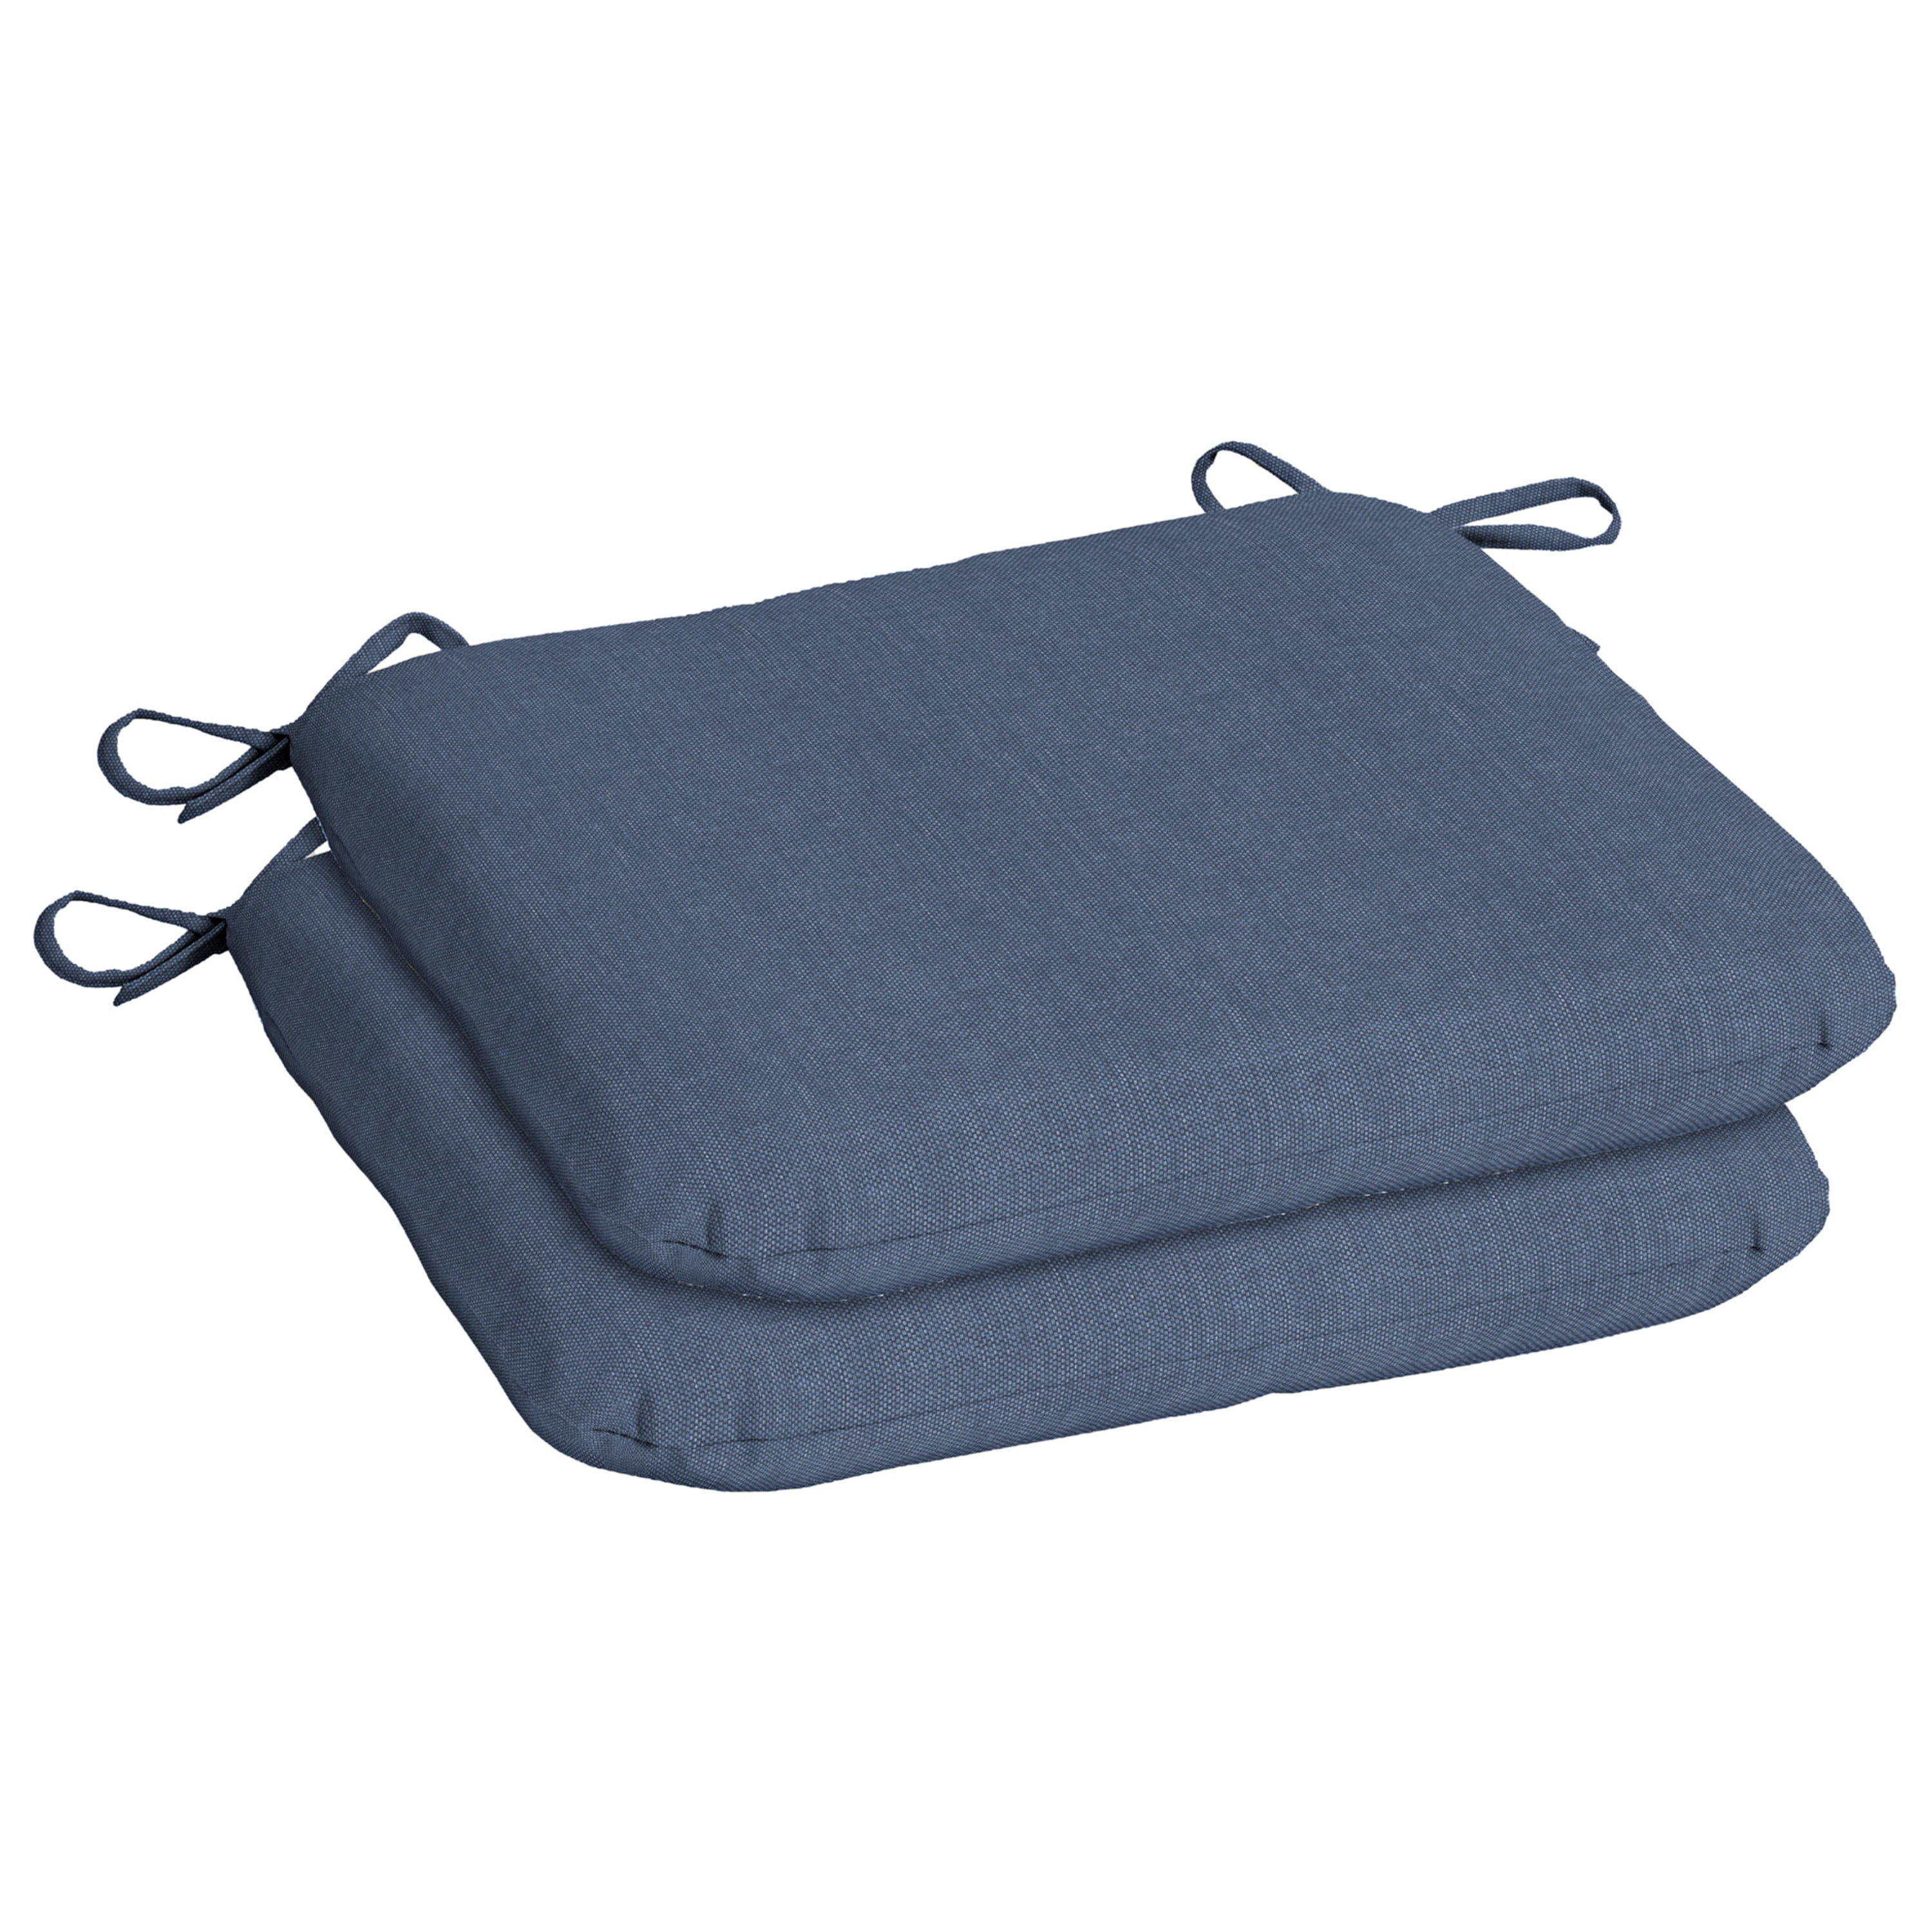 Mainstays Textured Chair Seat Pad (Chair Cushion), Navy Color, 4-Piece Set,  15.5 L x 16 W